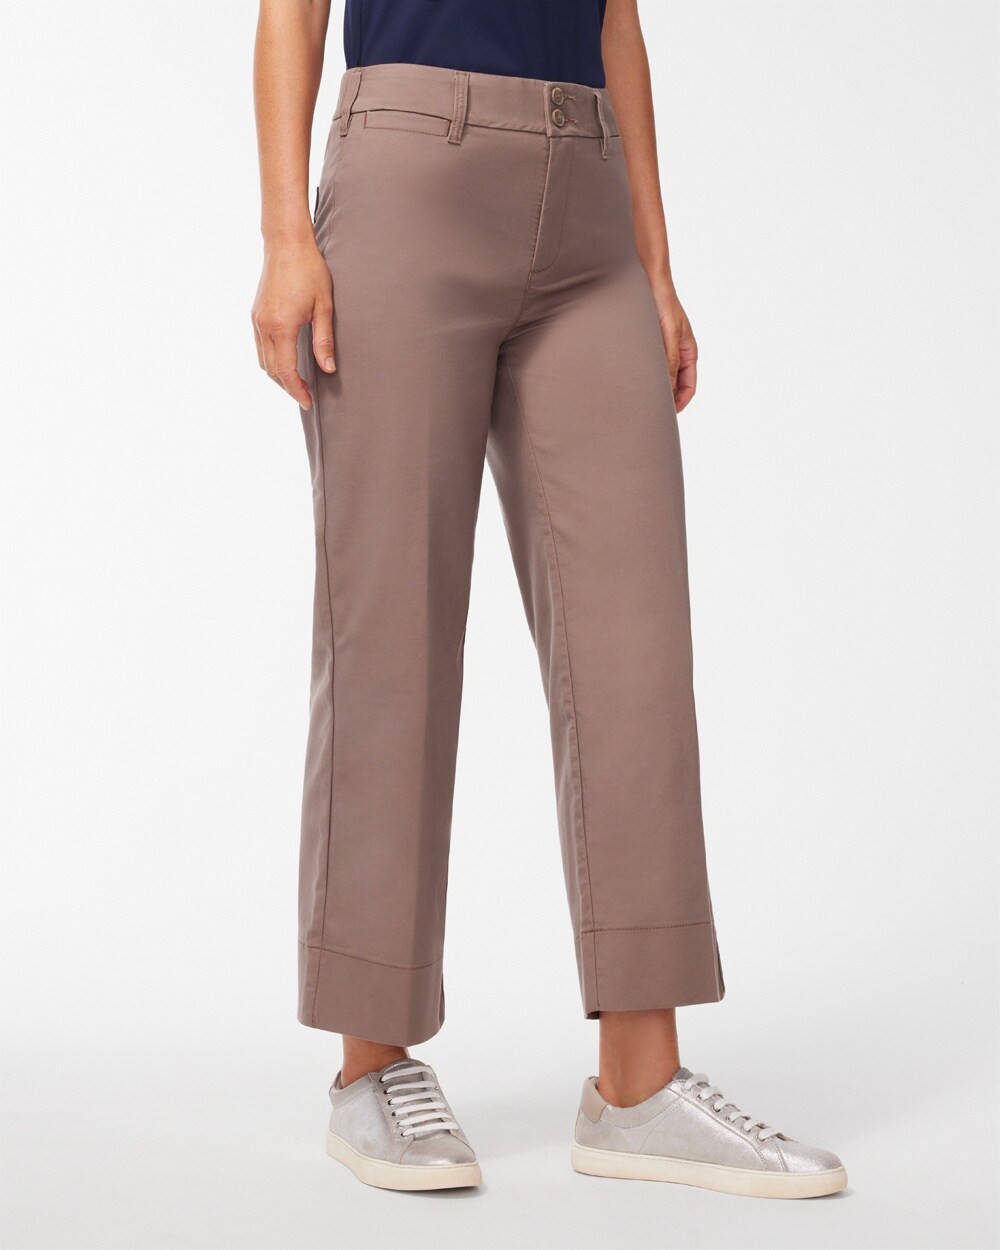 Twill High Rise Wide Leg Cropped Pants video preview image, click to start video